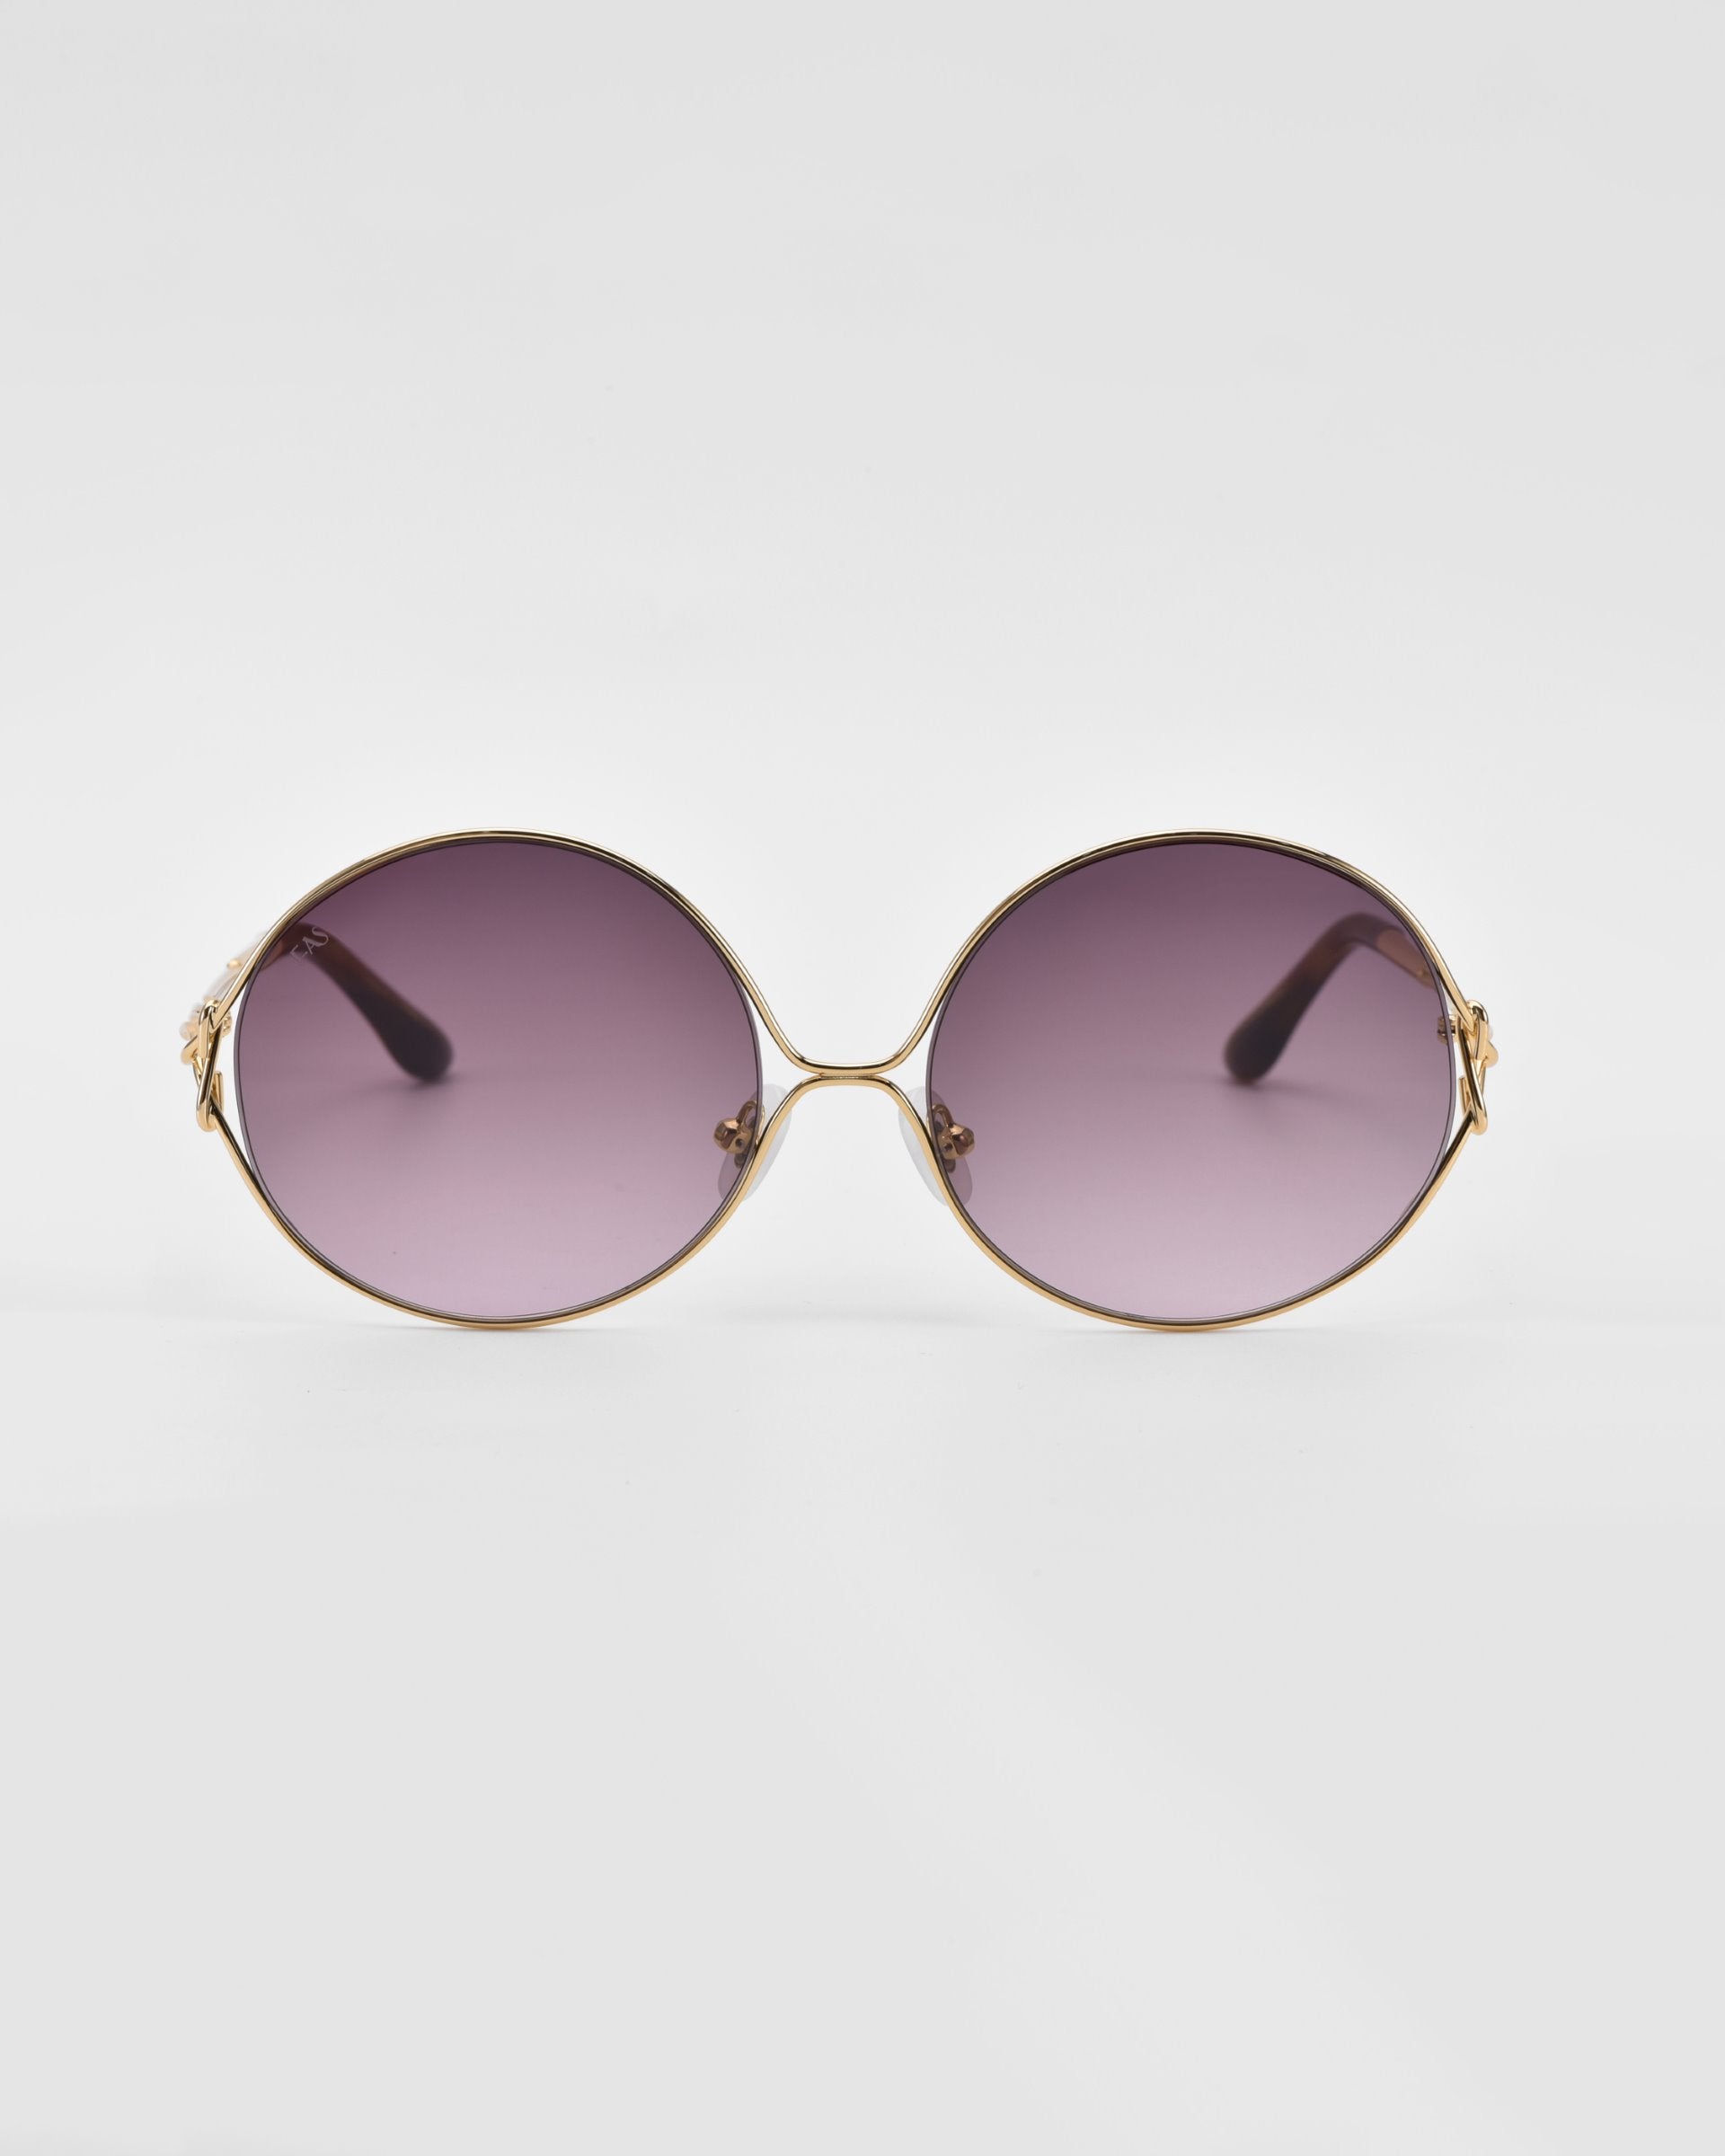 A pair of stylish, retro-inspired For Art's Sake® Aura sunglasses with oversized round gold frames and dark, gradient purple lenses. The edges of the frames feature decorative gold accents. The background is plain white.